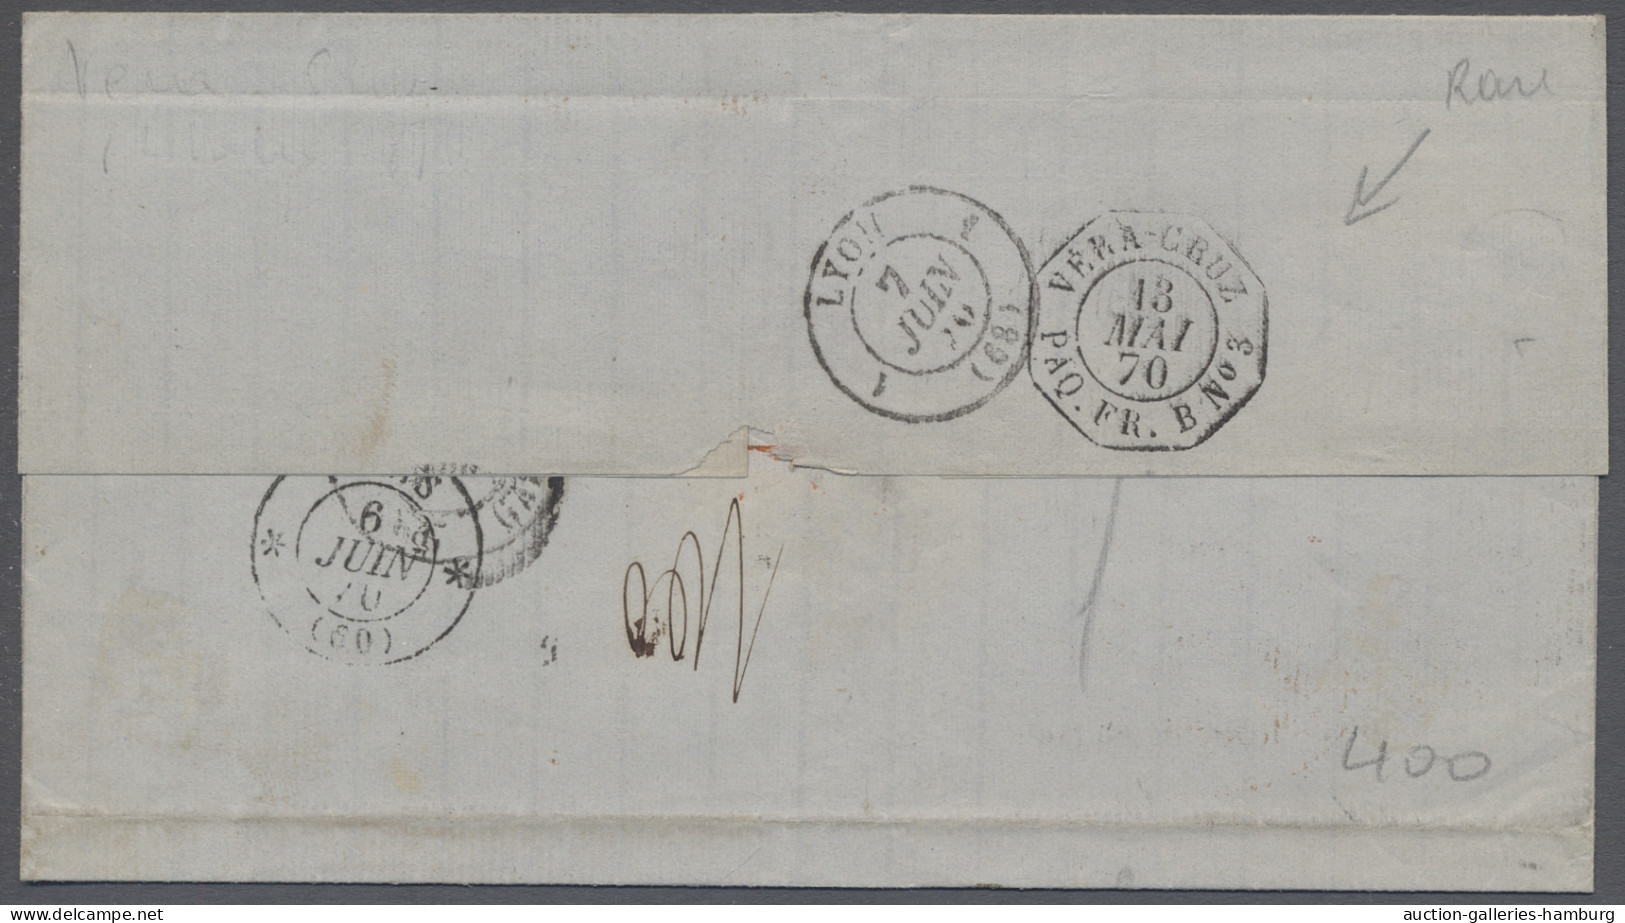 Cover Mexico - Pre Adhesives  / Stampless Covers: 1870, May 12, EL From VERA CRUZ To L - Mexico